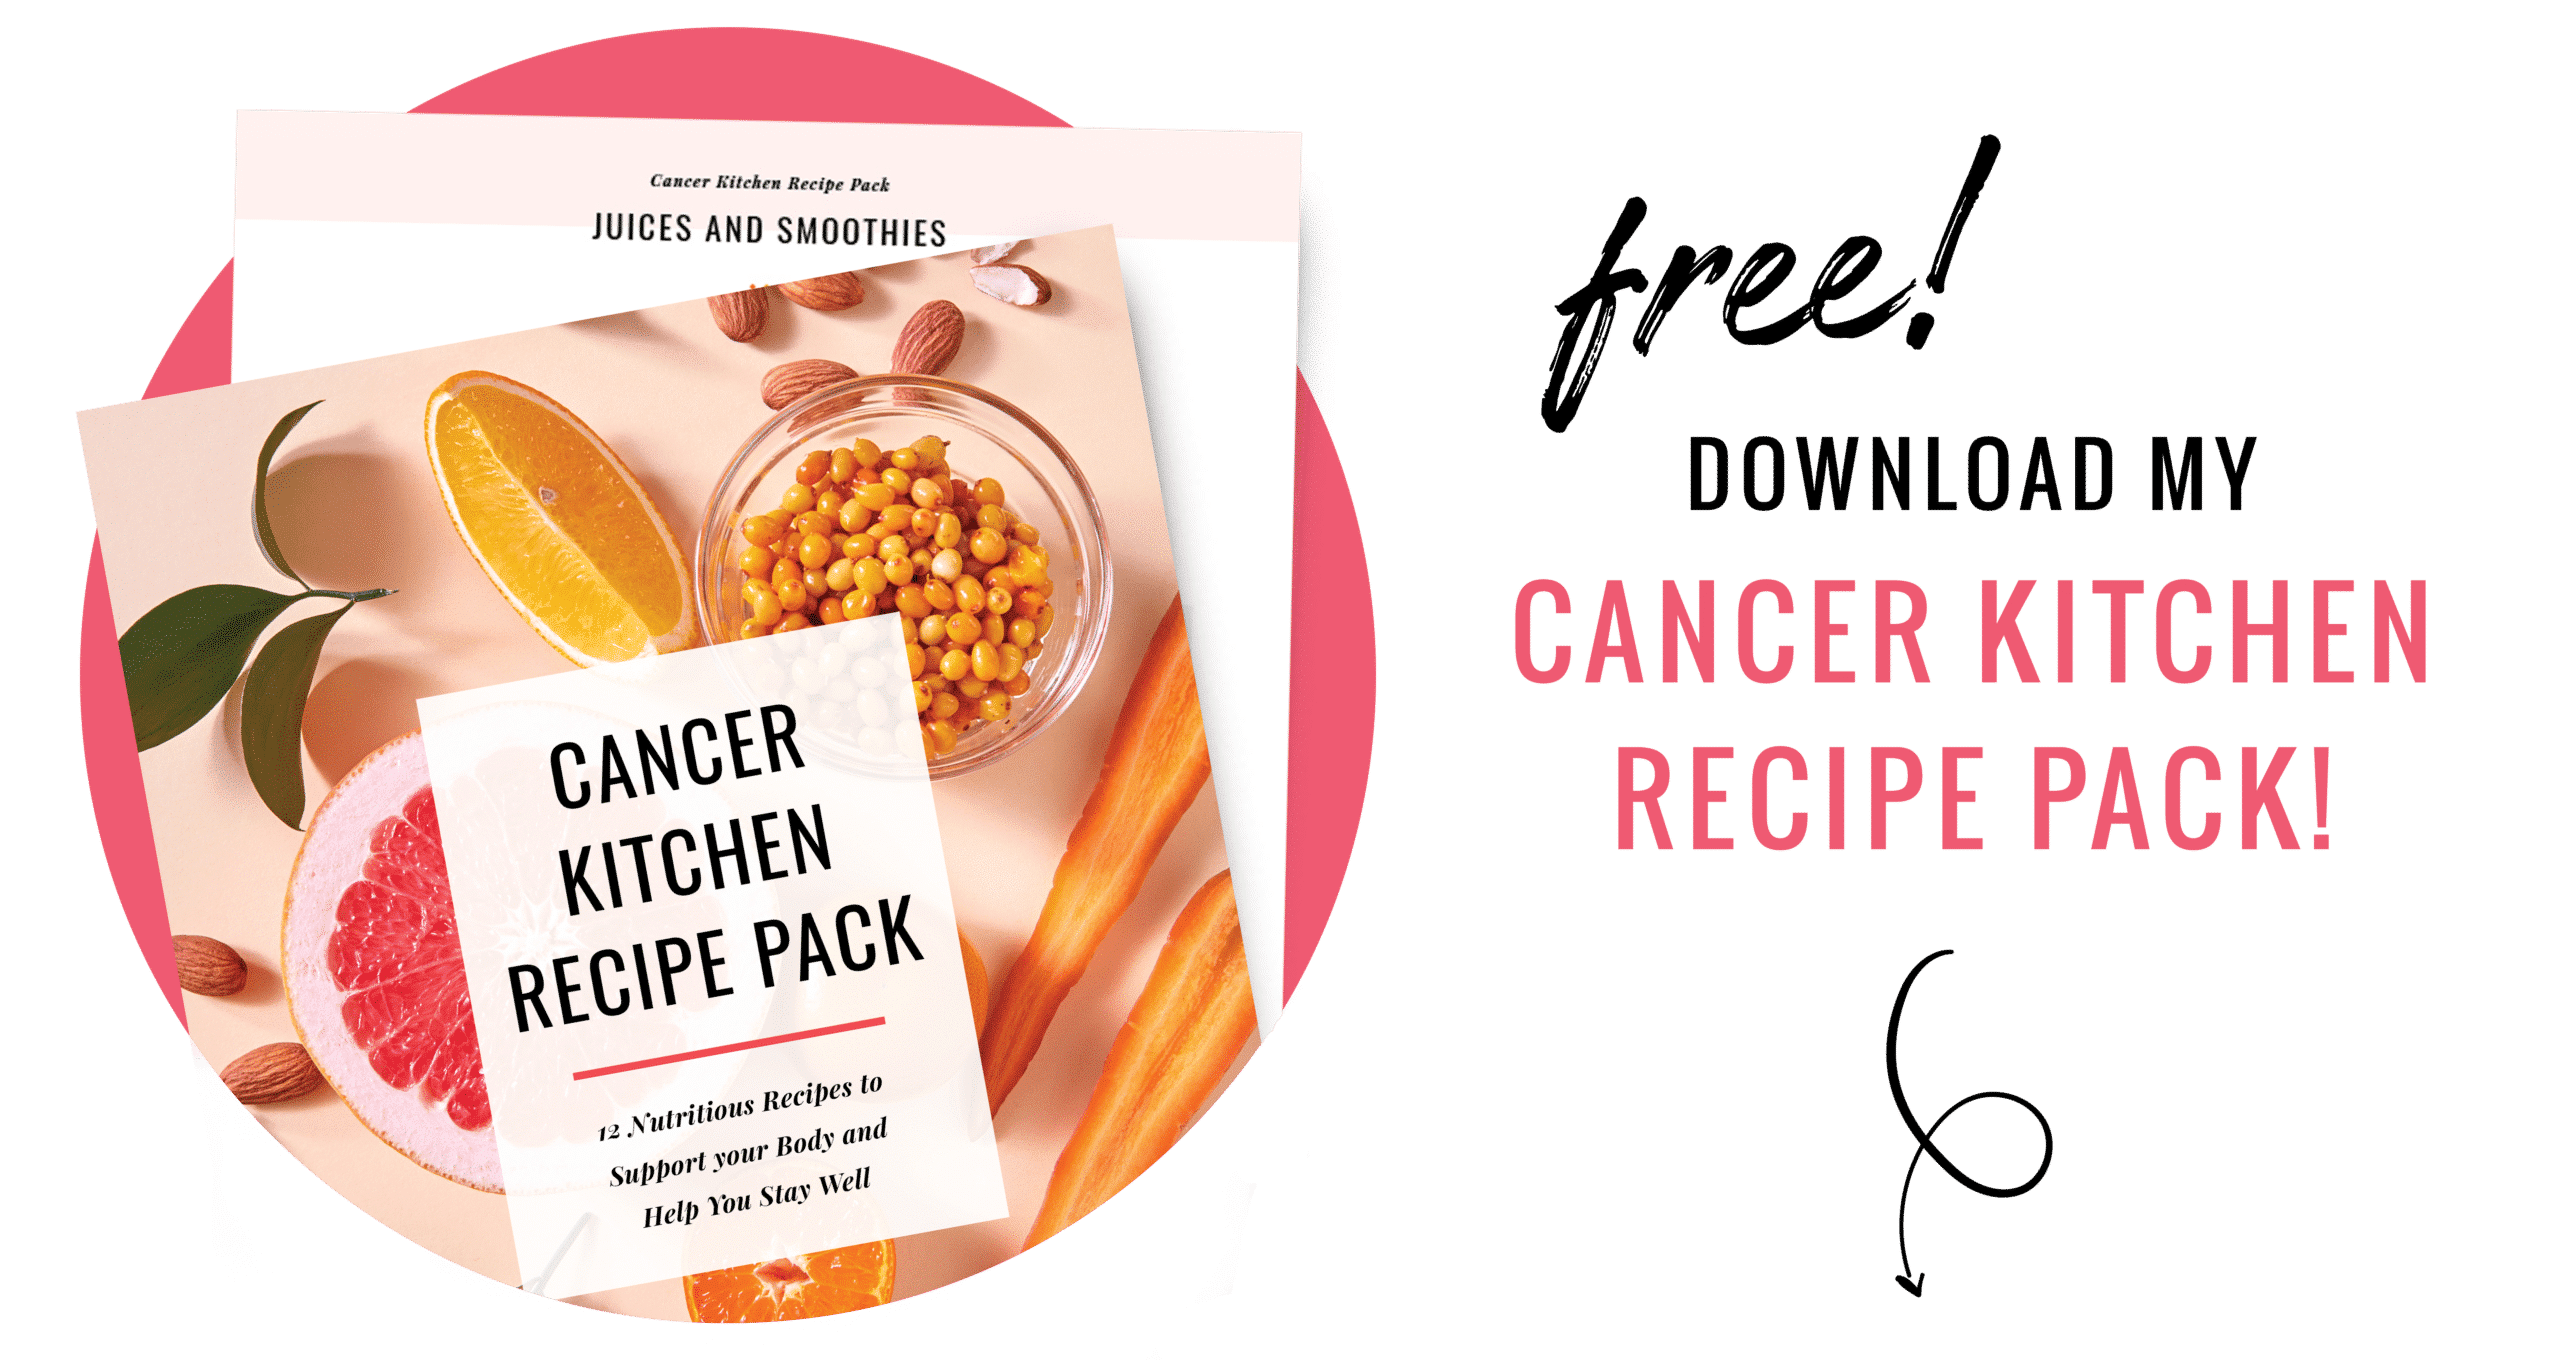 Get your Cancer Kitchen Recipe Pack